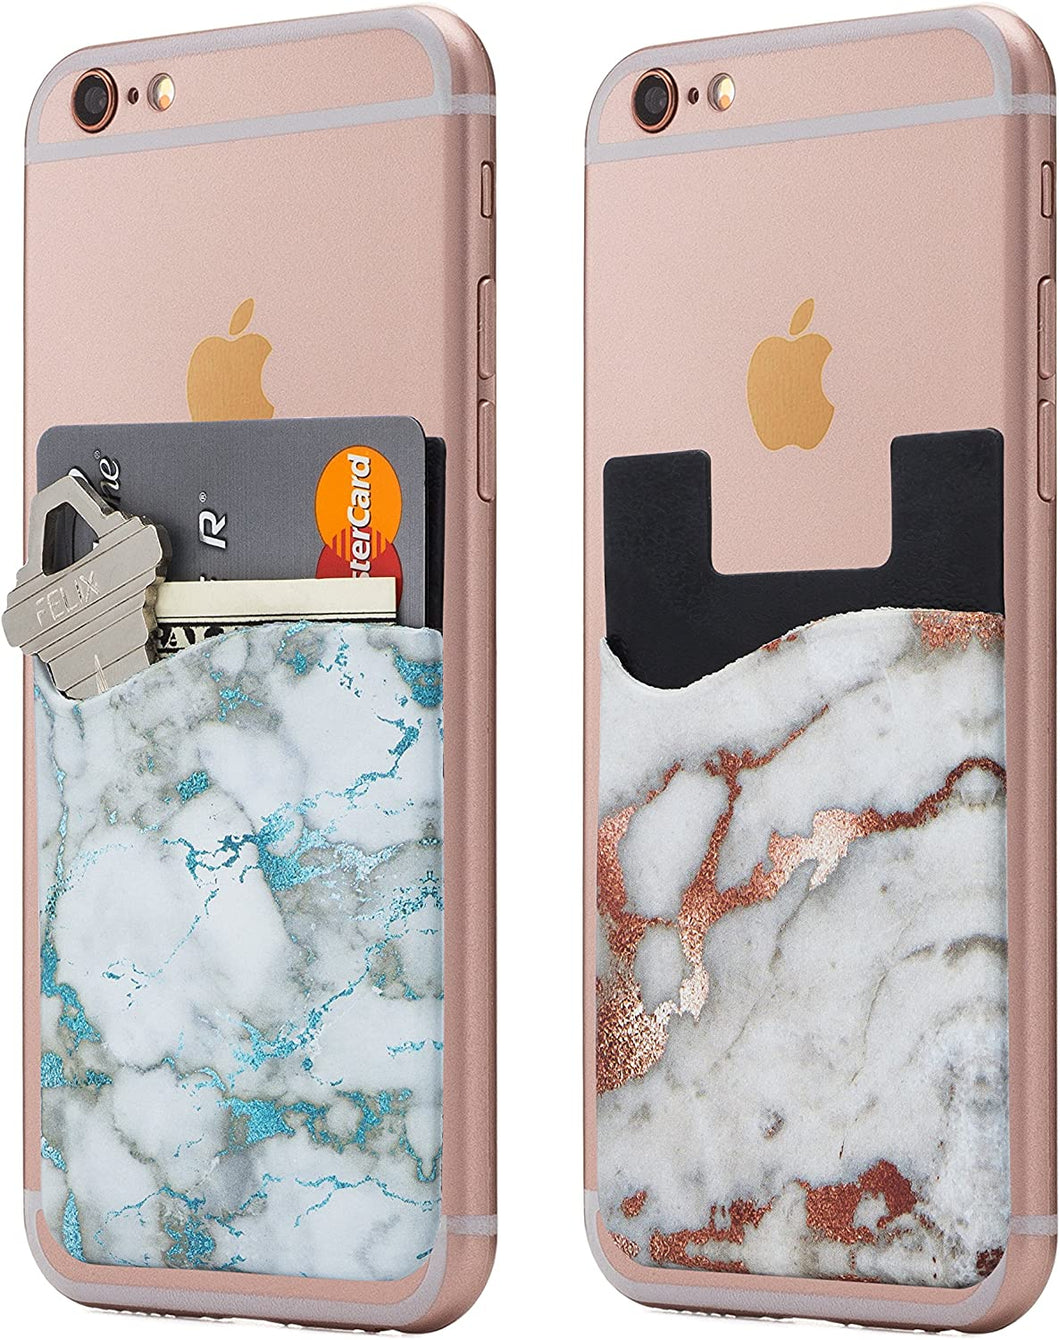 Cardly (Two) Marble Cell Phone Stick on Wallet Card Holder Phone Pocket for iPhone, Android and All Smartphones.